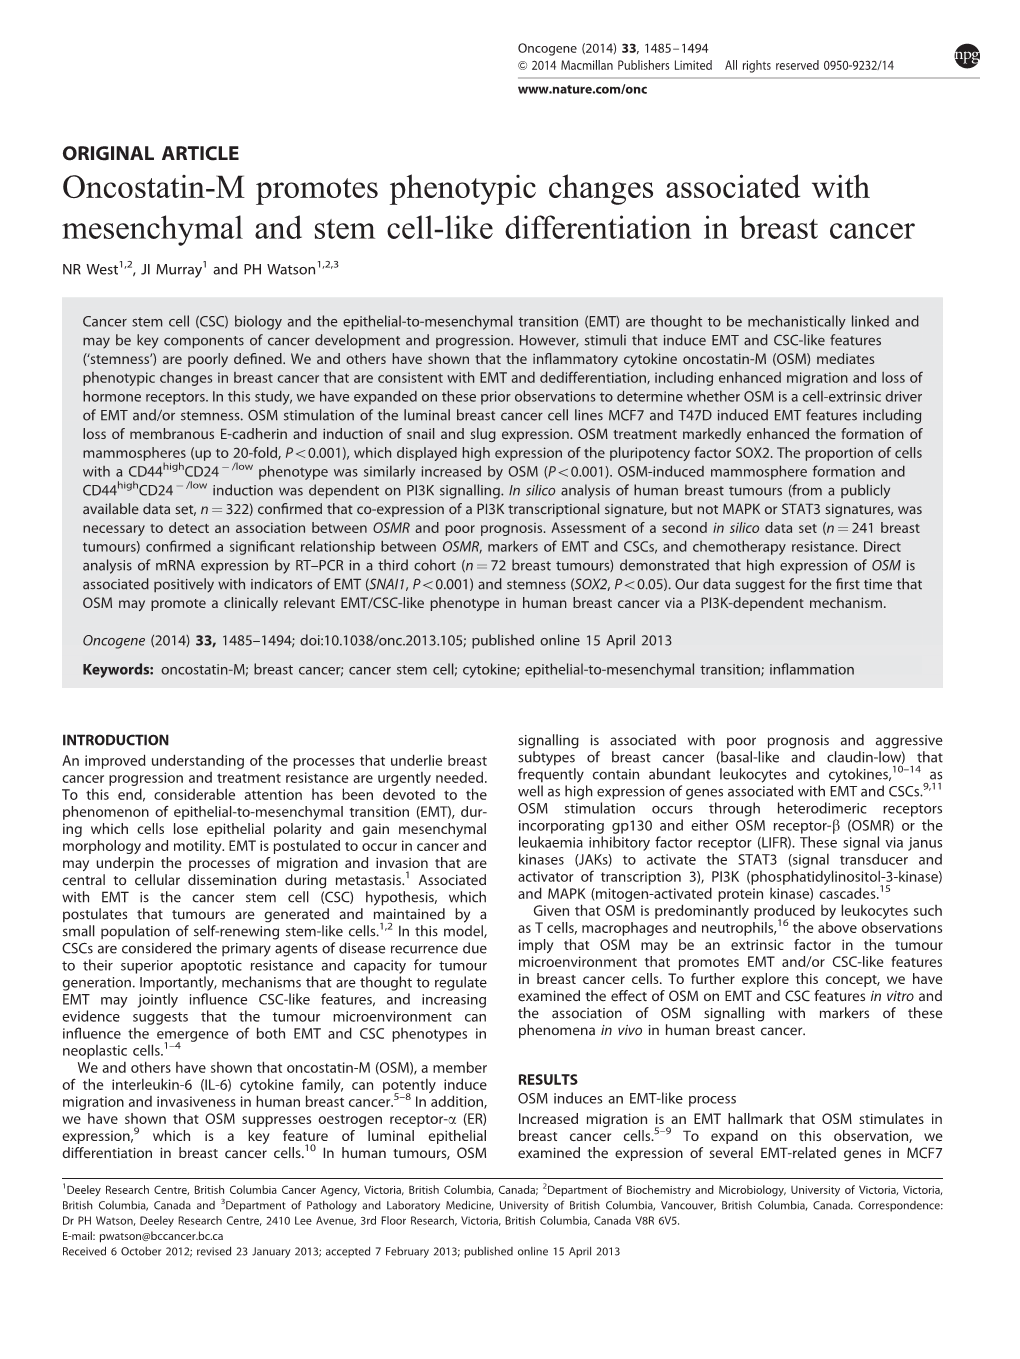 Oncostatin-M Promotes Phenotypic Changes Associated with Mesenchymal and Stem Cell-Like Differentiation in Breast Cancer